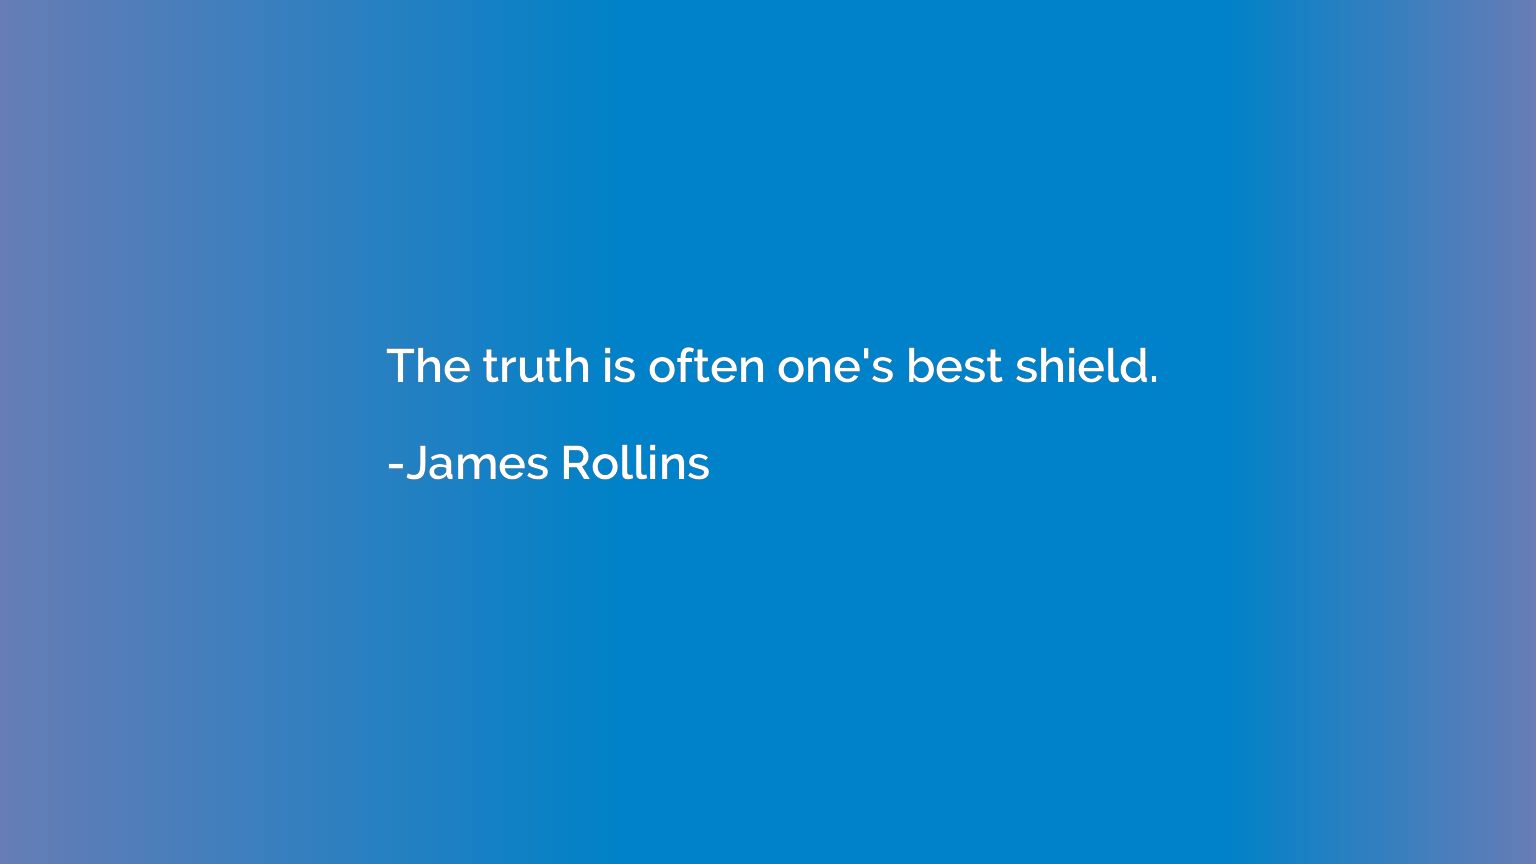 The truth is often one's best shield.